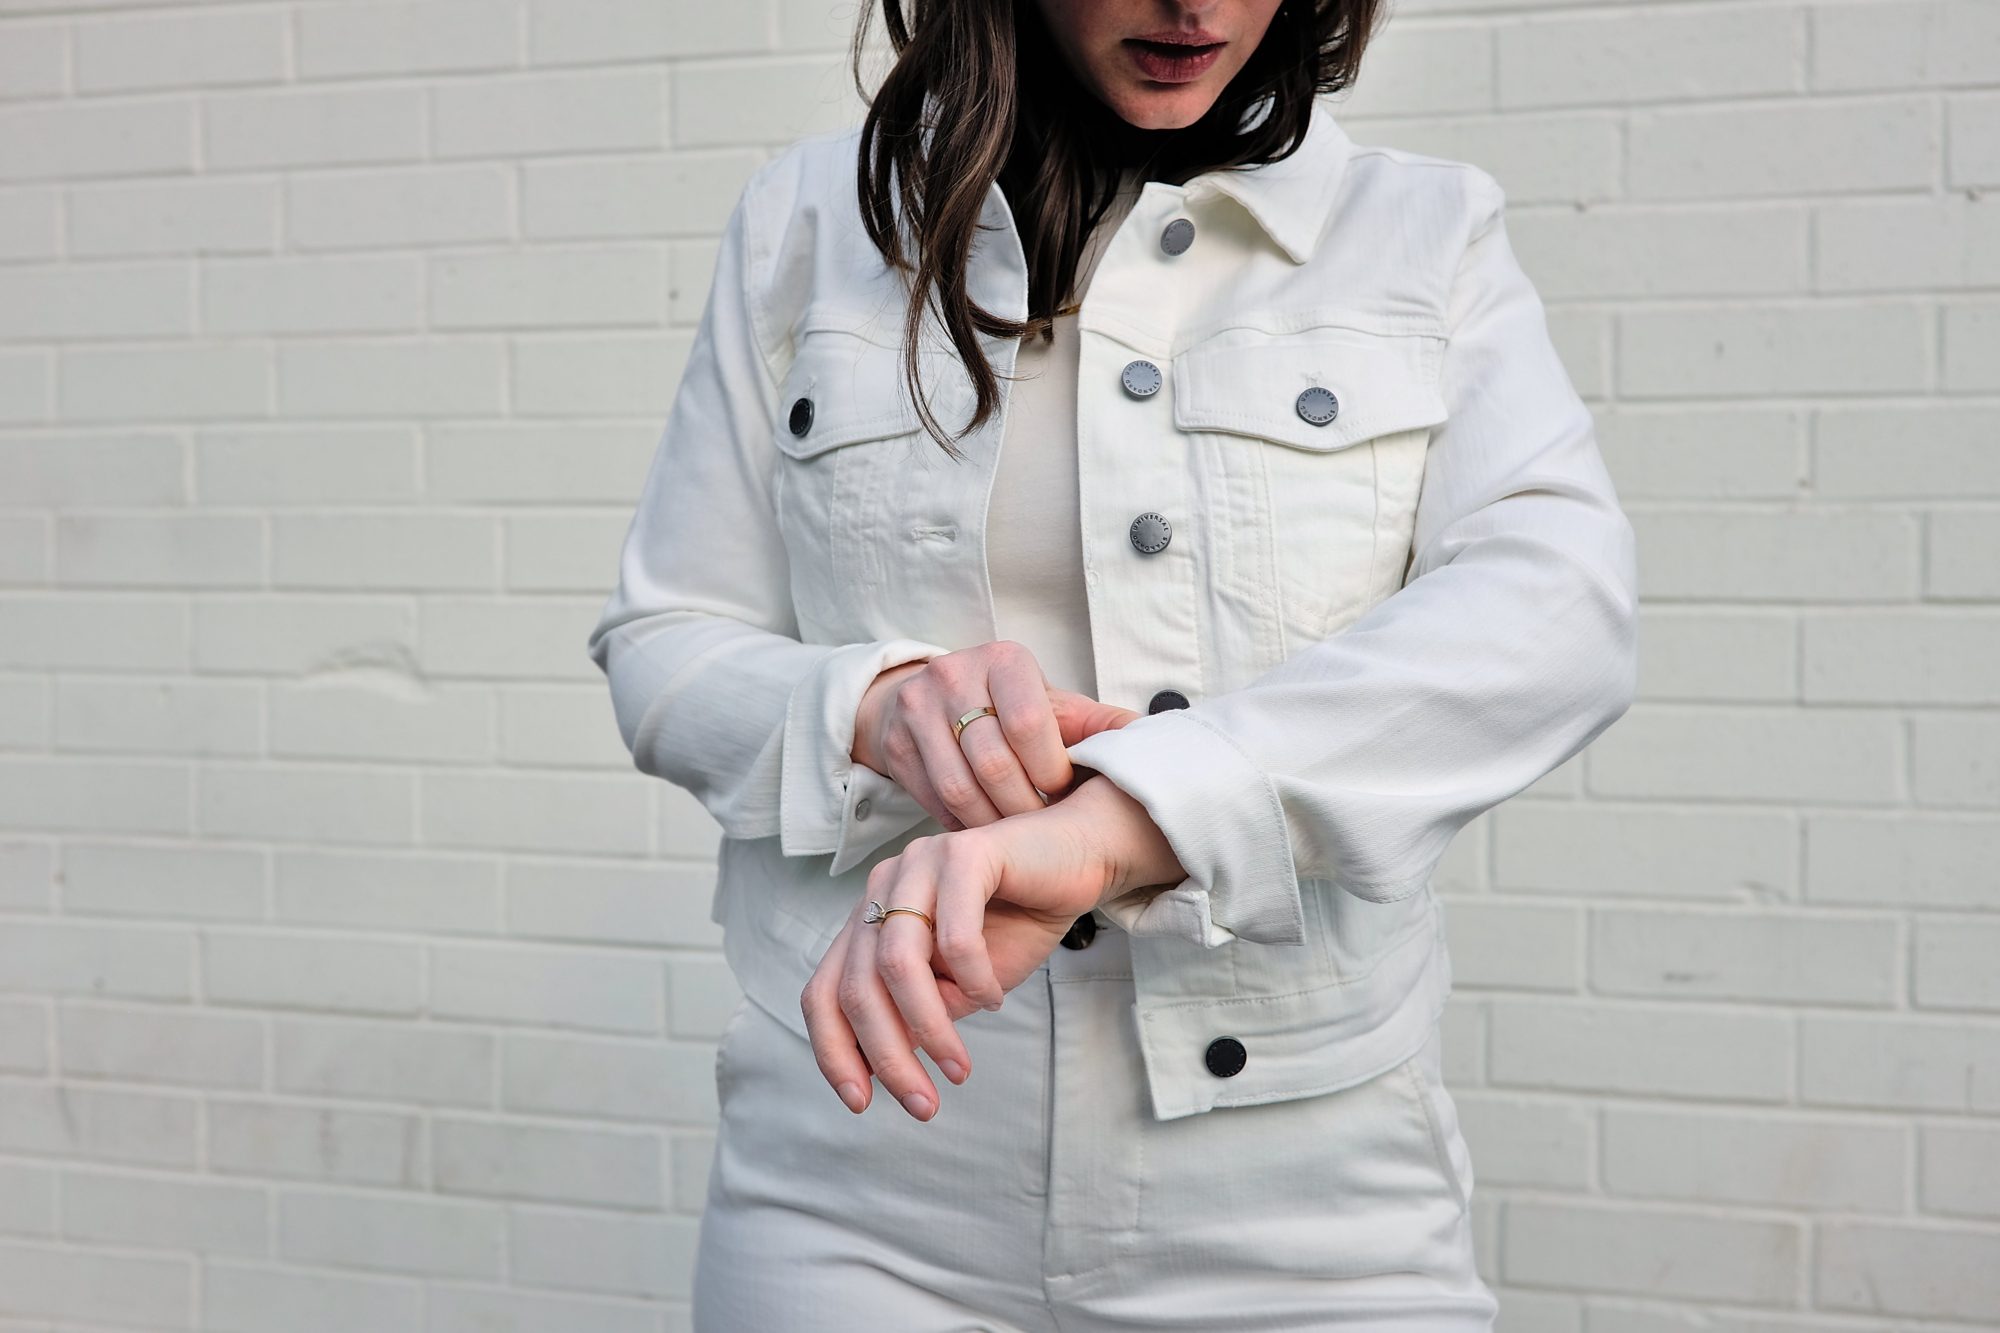 Alyssa cuffs the sleeves of the Kelsey Denim Jacket from Universal Standard